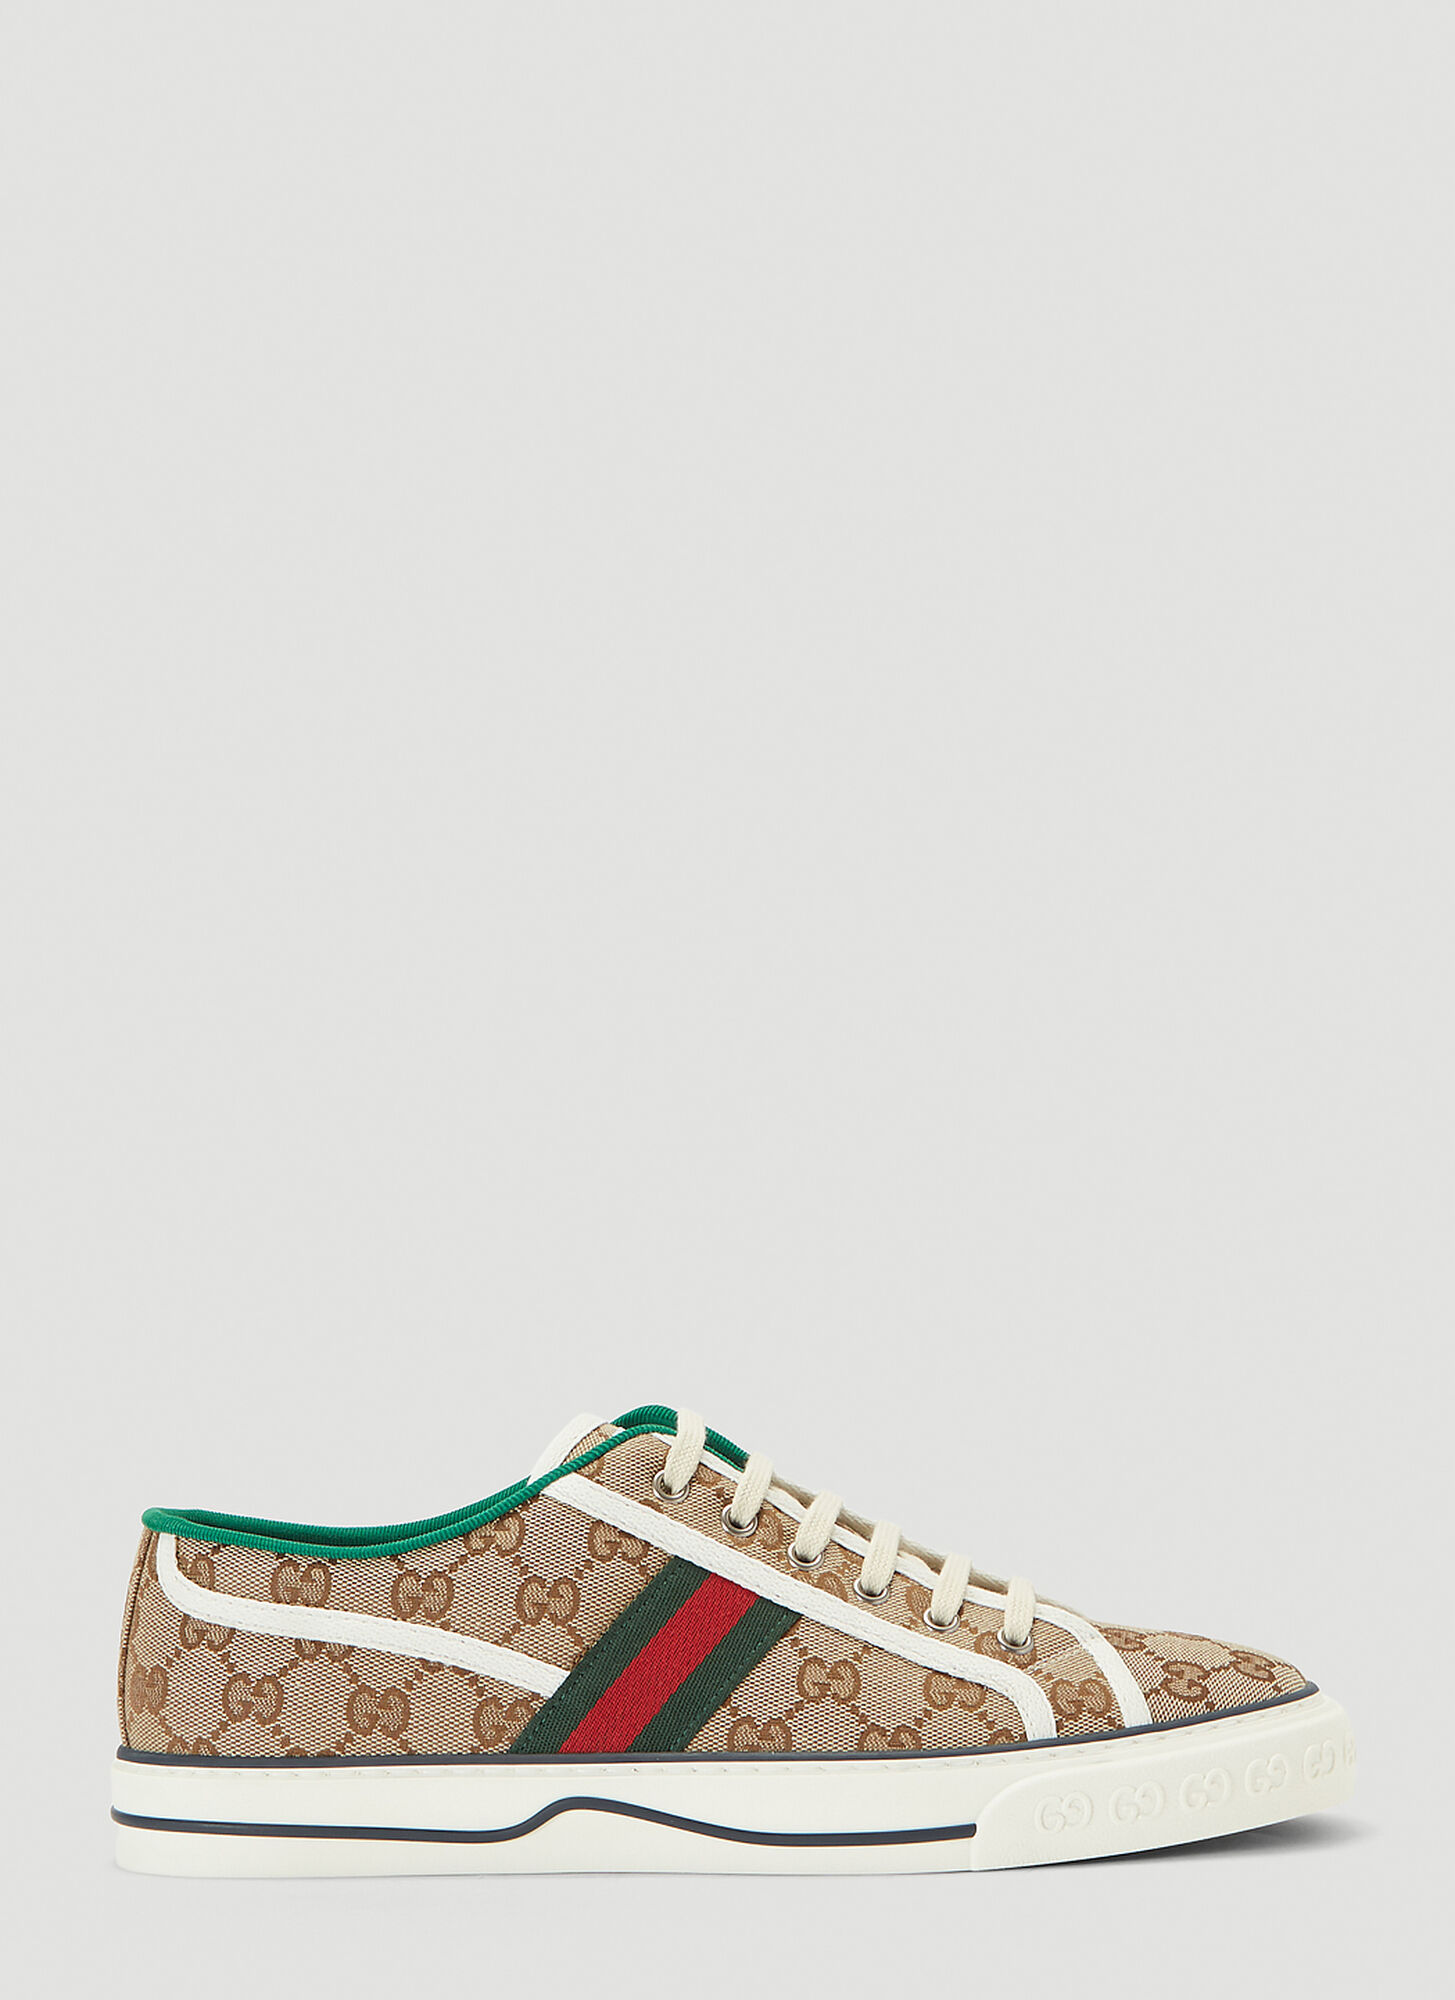 Gucci GG Tennis 1977 Sneakers in Beige size UK - 11 | The Fashionisto